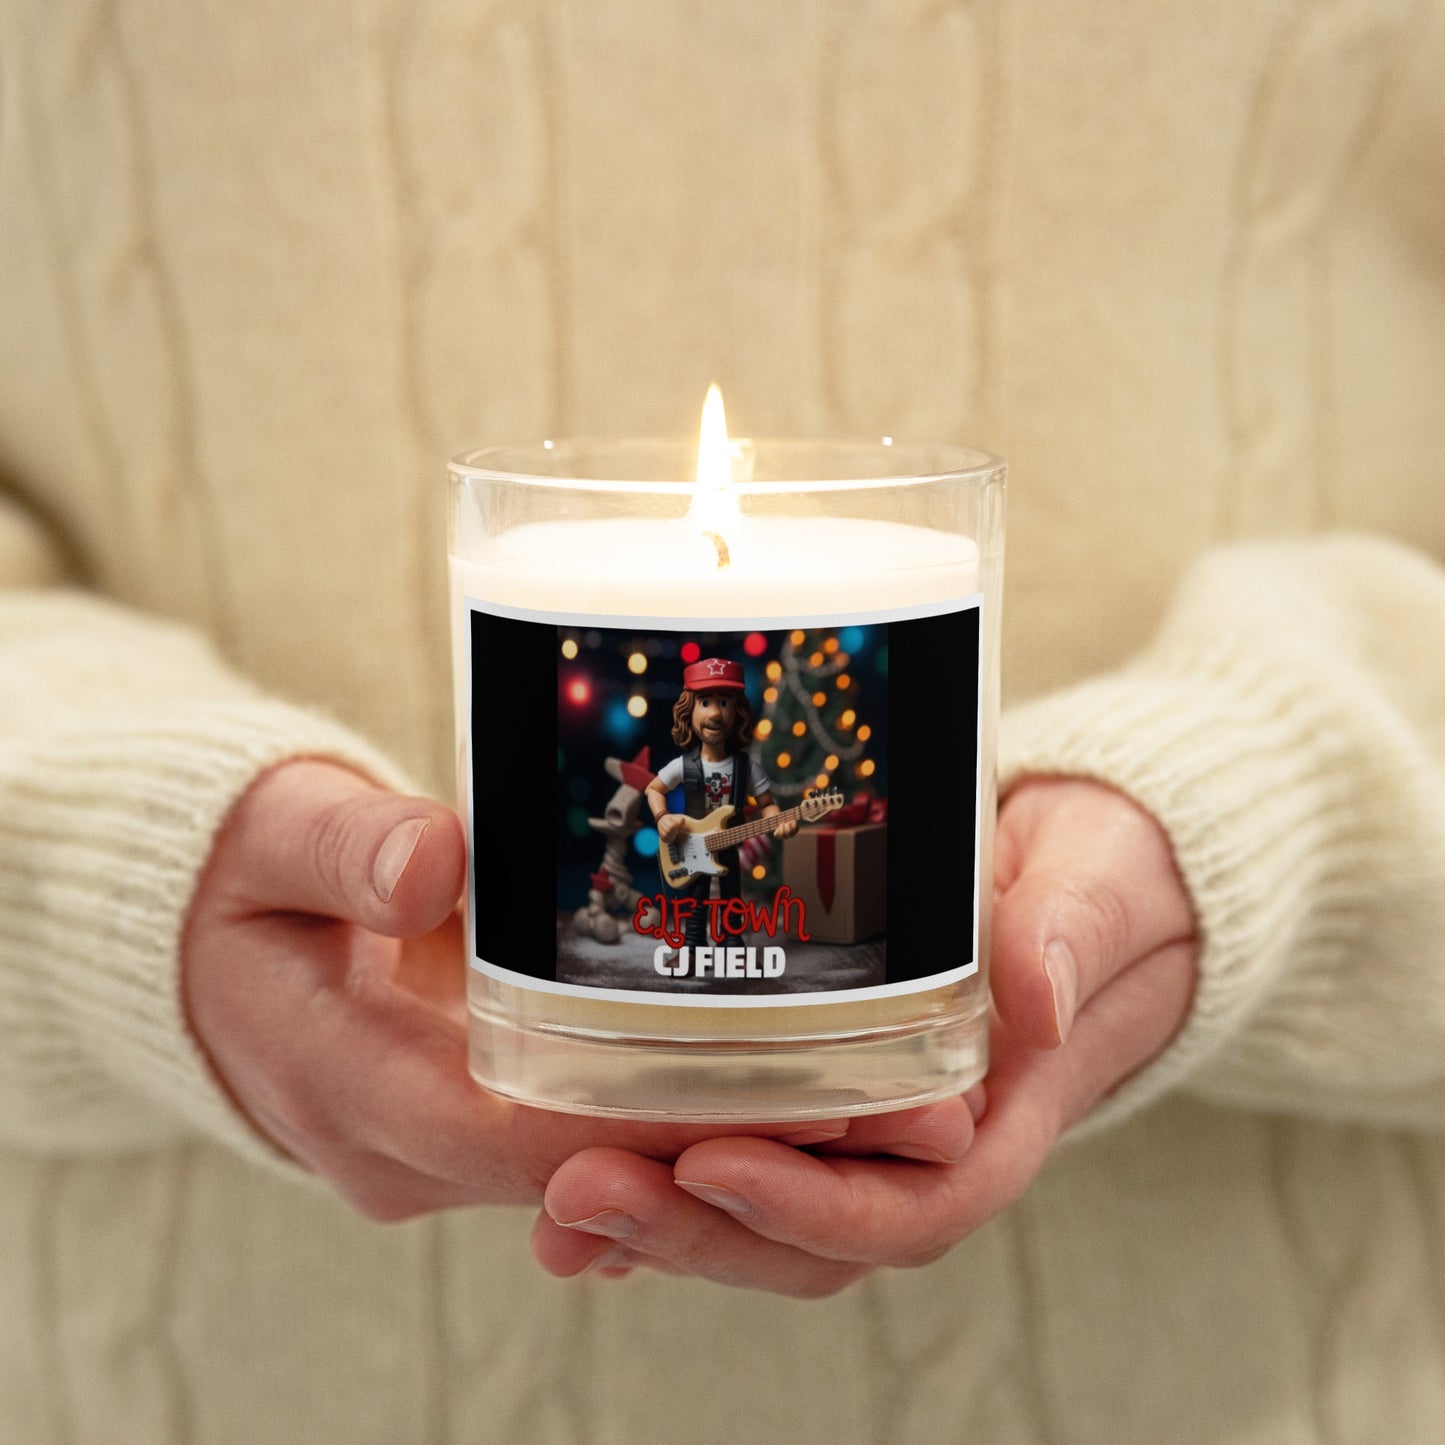 "Elf Town" Wax Candle